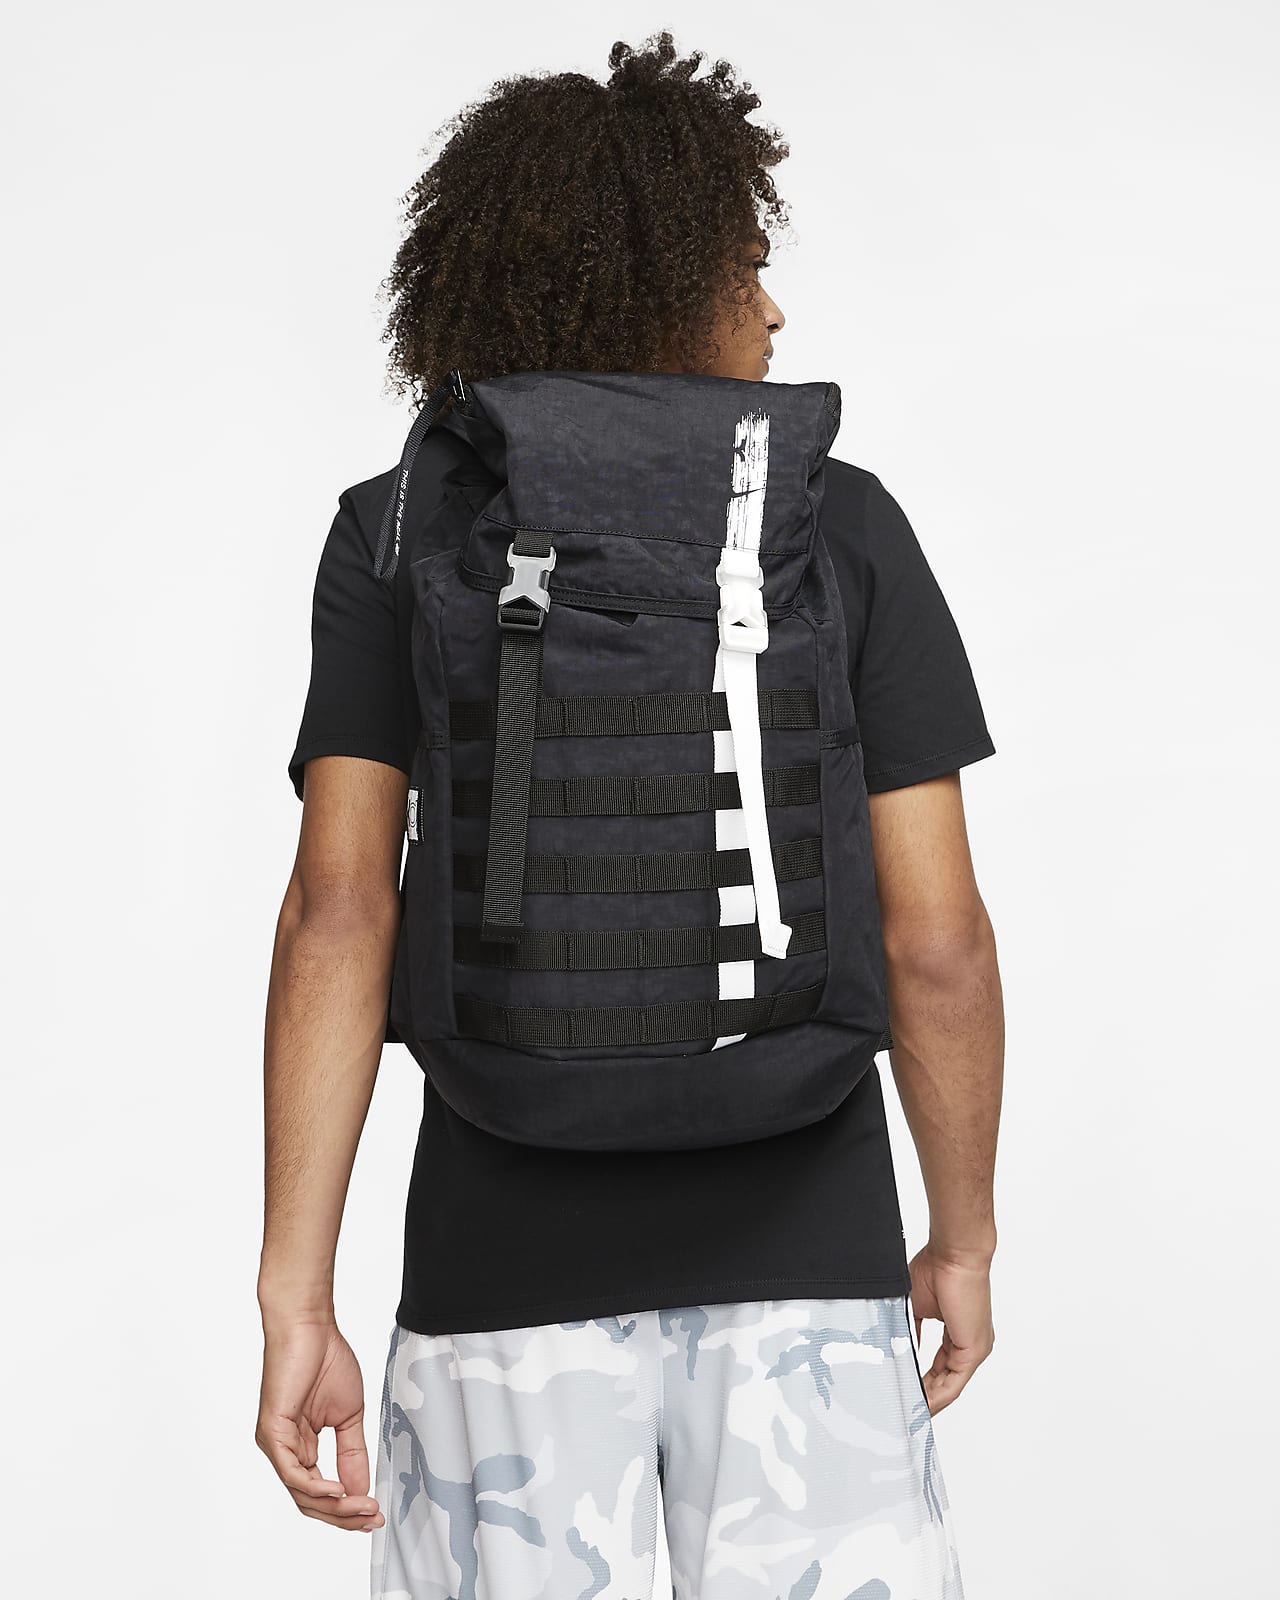 new kd backpack